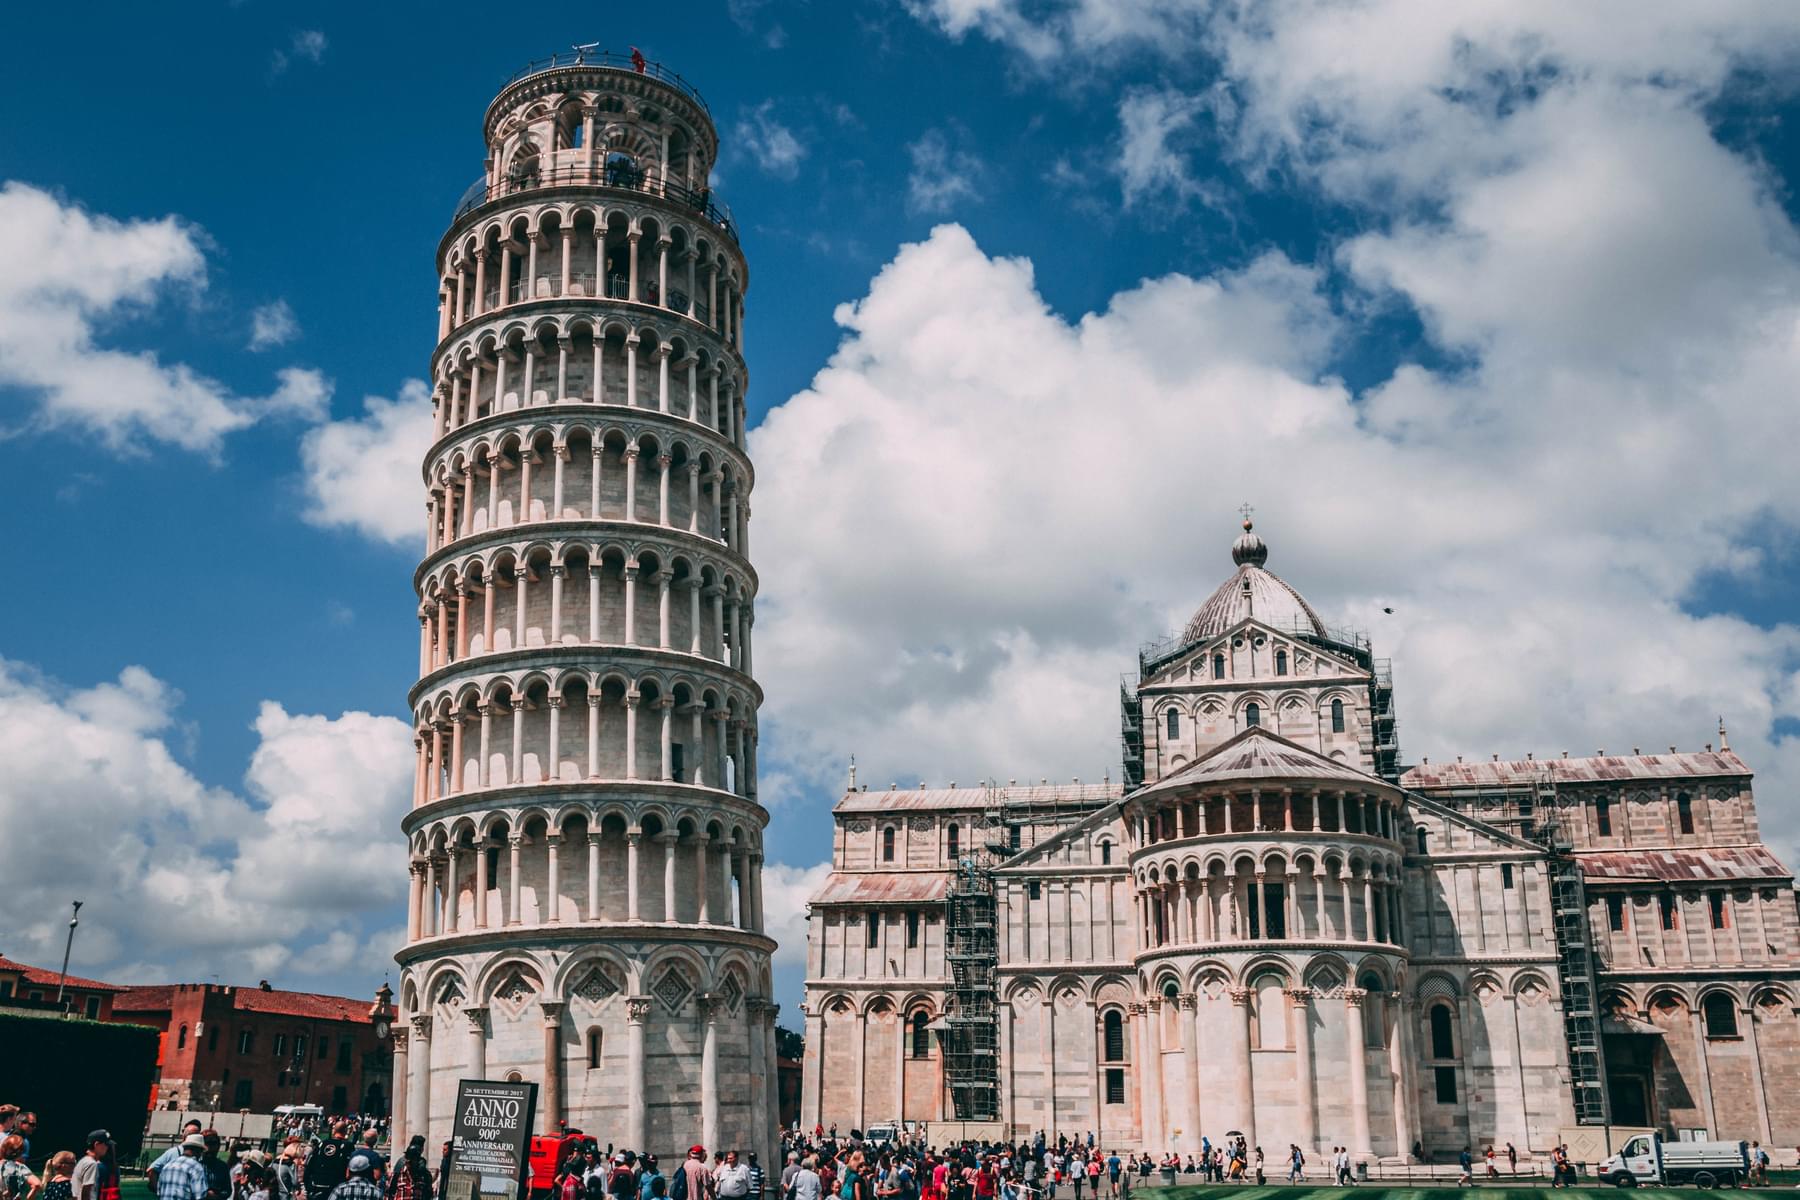 Visit Leaning Tower of Pisa